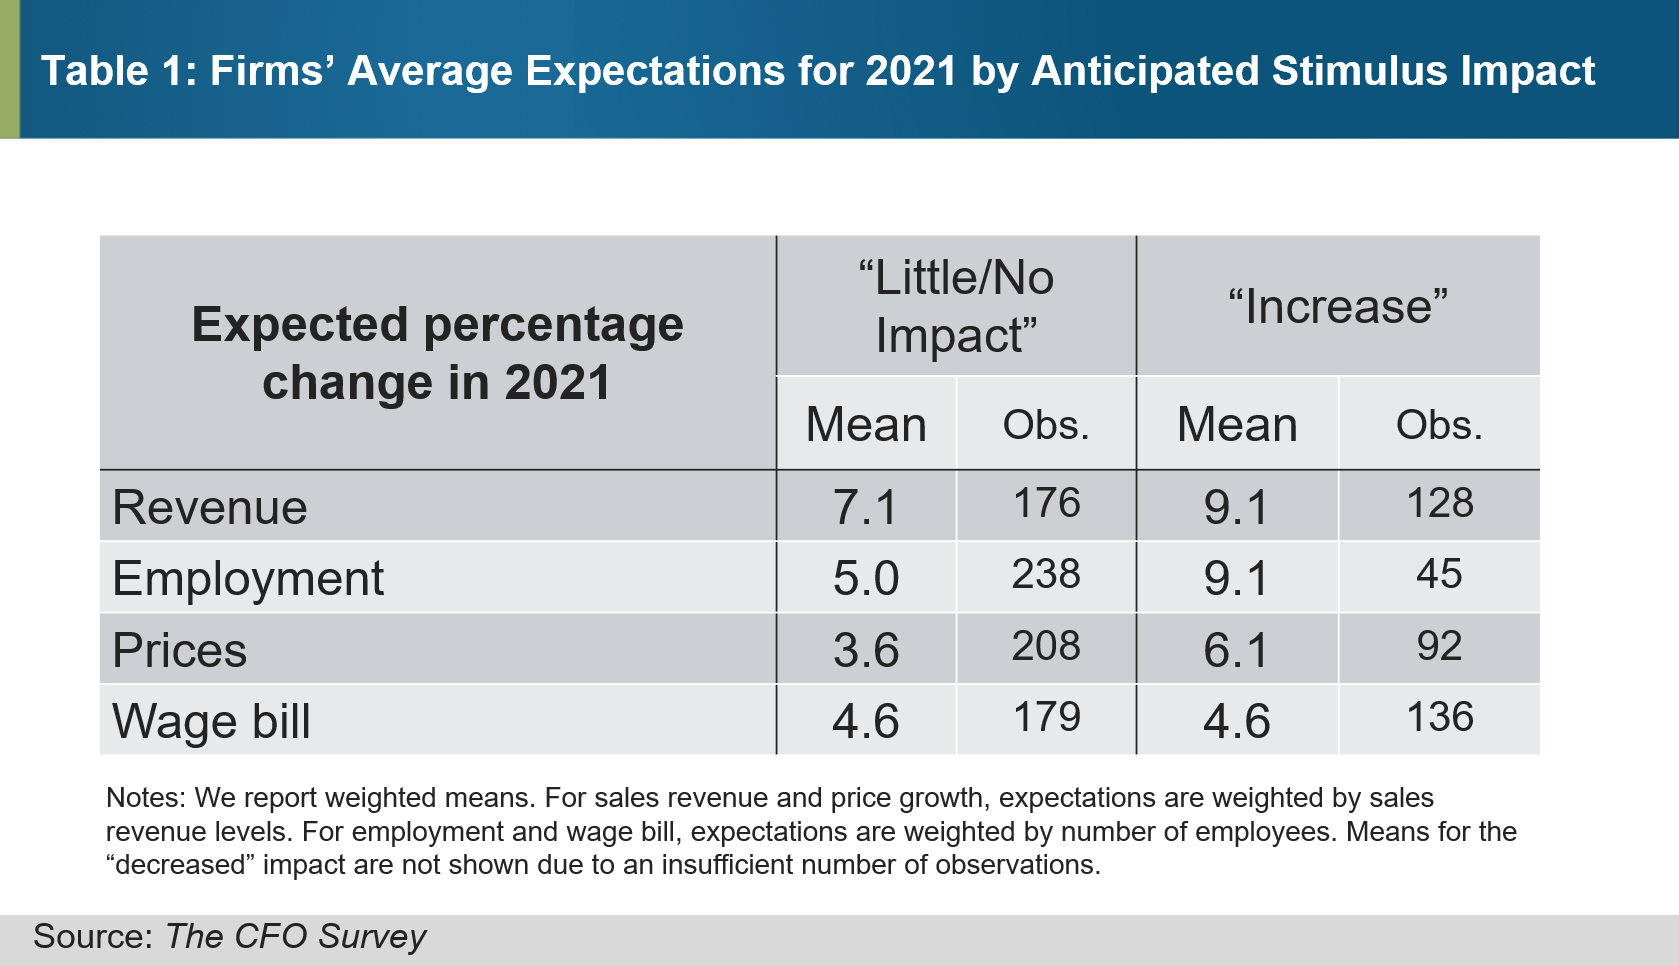 Table 1 of 1: Average Expectations for 2021 by Anticipated Stimulus Impact